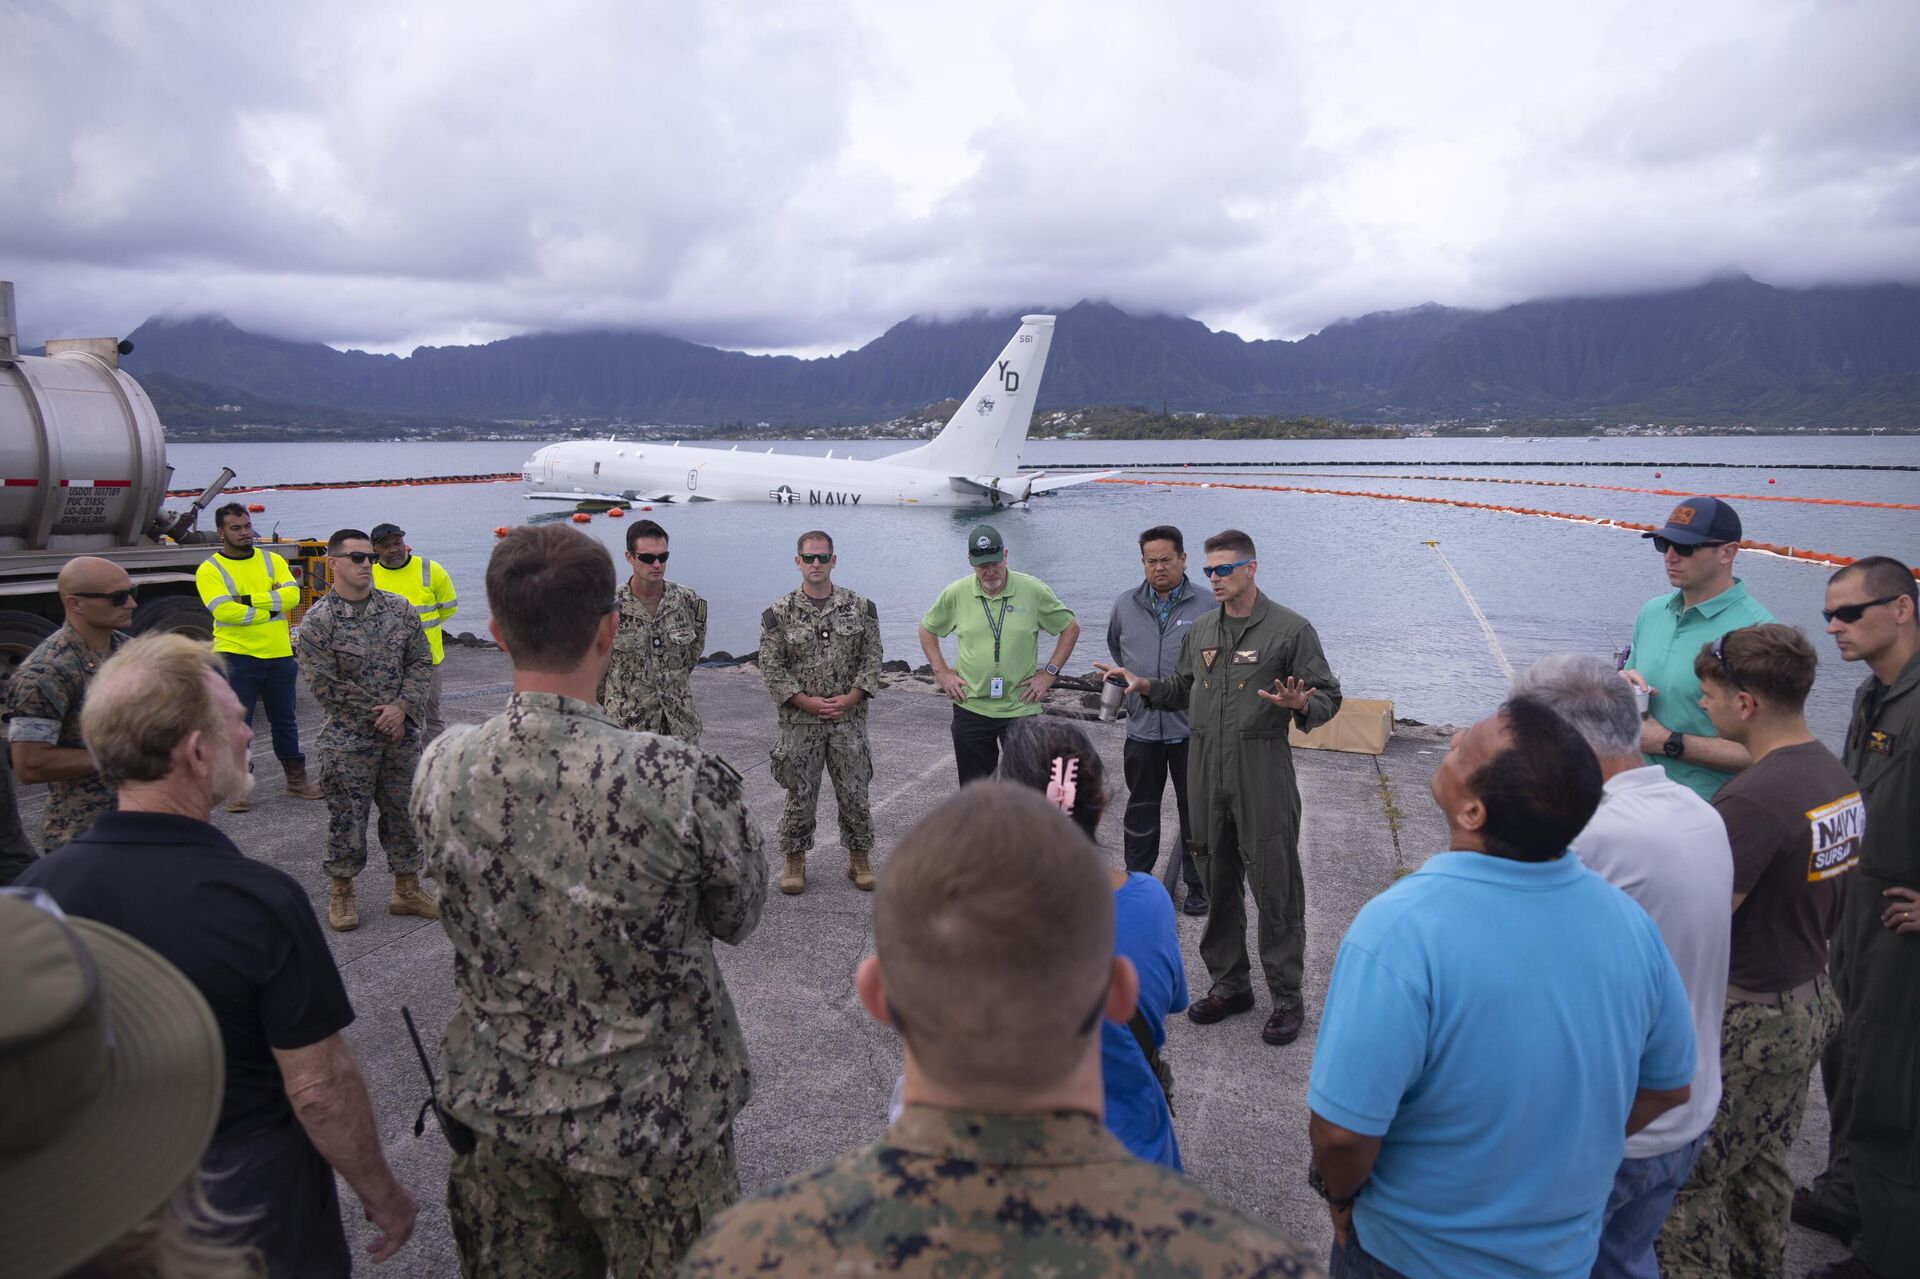 U.S. Marine Corps Col. Jeremy Beaven, commanding officer, Marine Corps Base Hawaii, provides guidance and emphasizes safety before defueling operations commence on a downed U.S. Navy P-8A Poseidon in waters just off the runway at Marine Corps Air Station Kaneohe Bay, MCBH, Nov. 26, 2023. The successful defueling of the downed P-8A was critical to the execution of the aircraft salvage plan. - Sputnik International, 1920, 01.12.2023